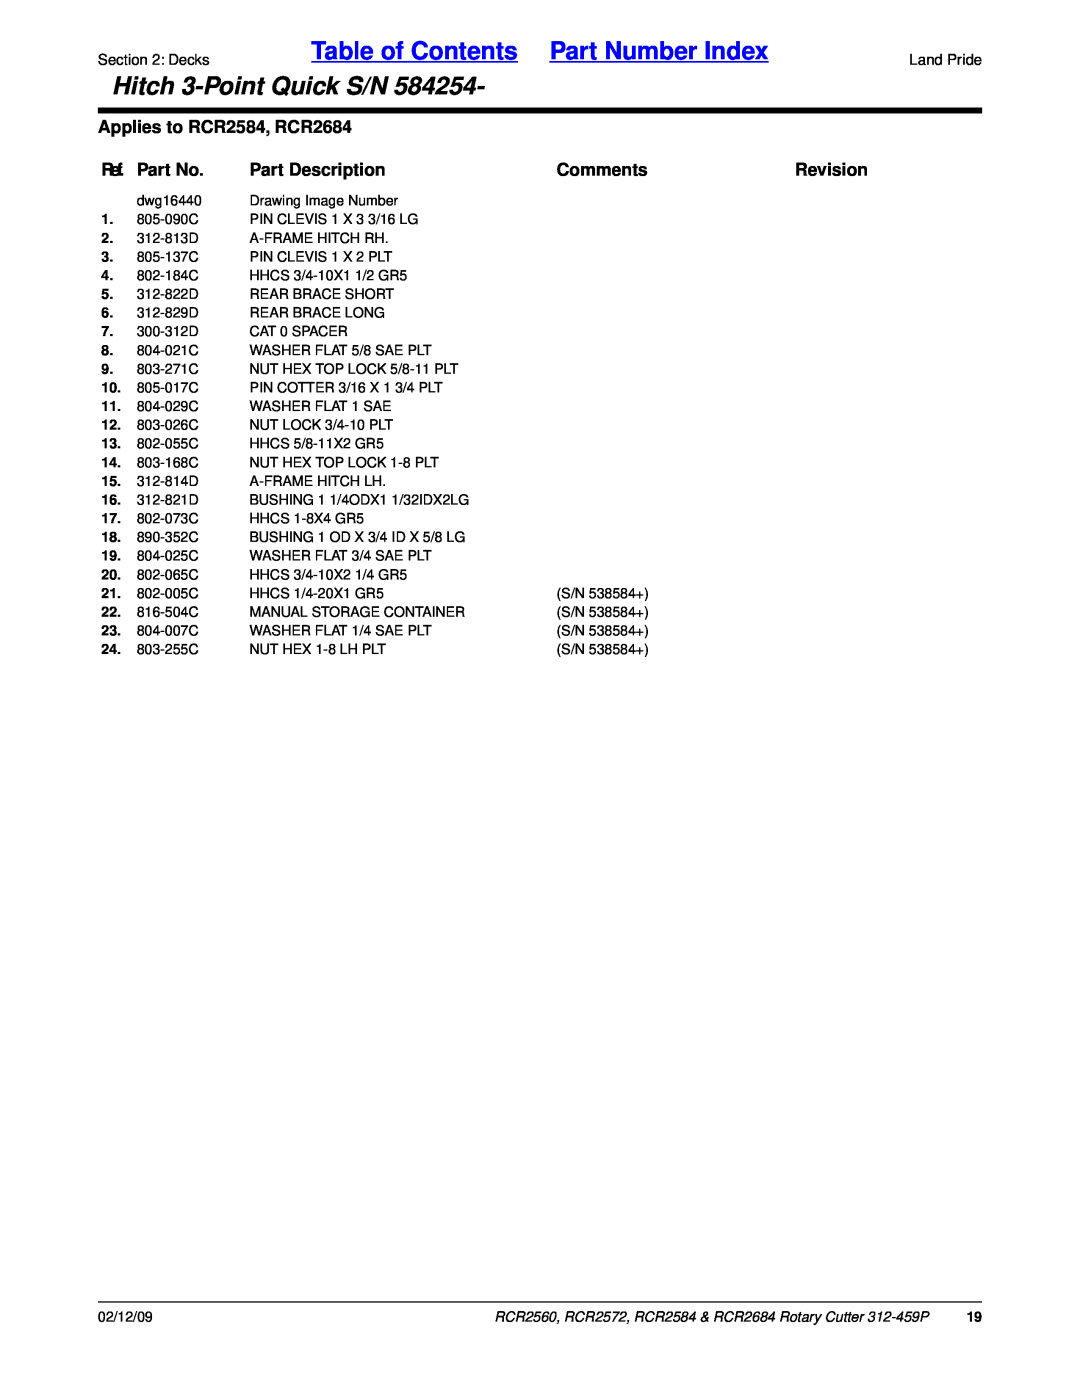 Land Pride RCR2560 Table of Contents Part Number Index, Hitch 3-PointQuick S/N, Applies to RCR2584, RCR2684, Ref. Part No 